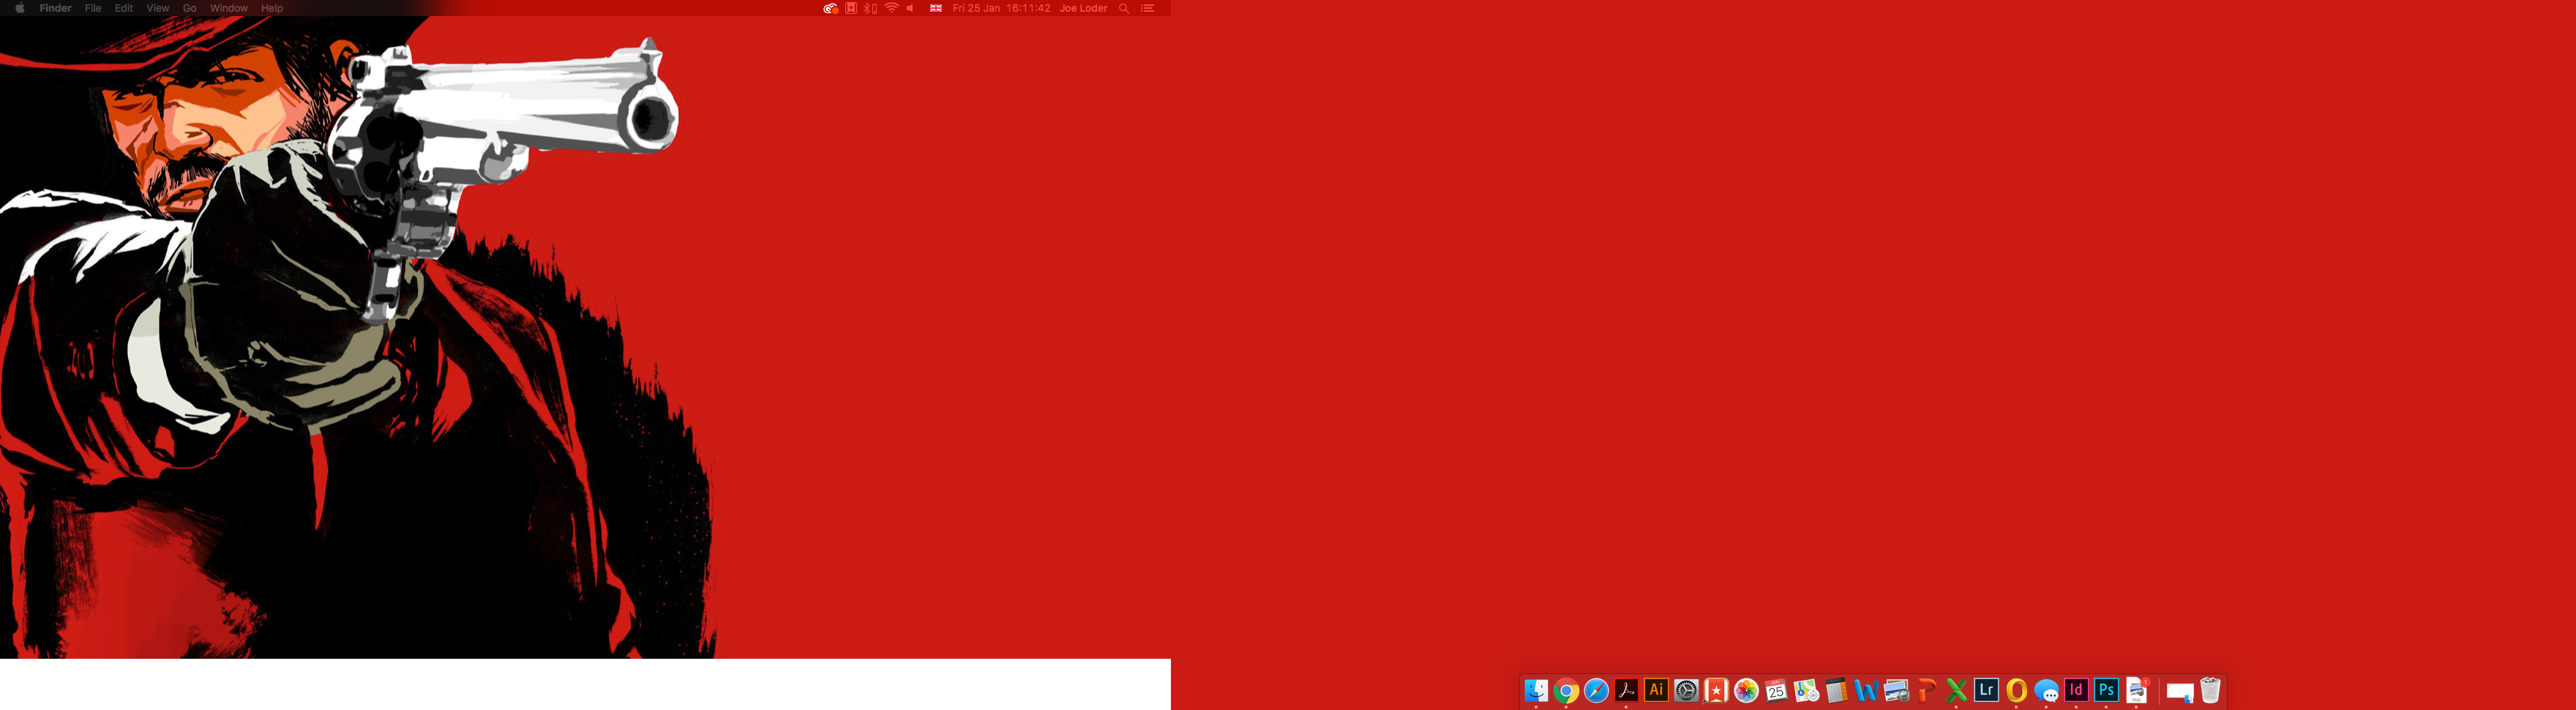 Red Dual Screen Wallpapers